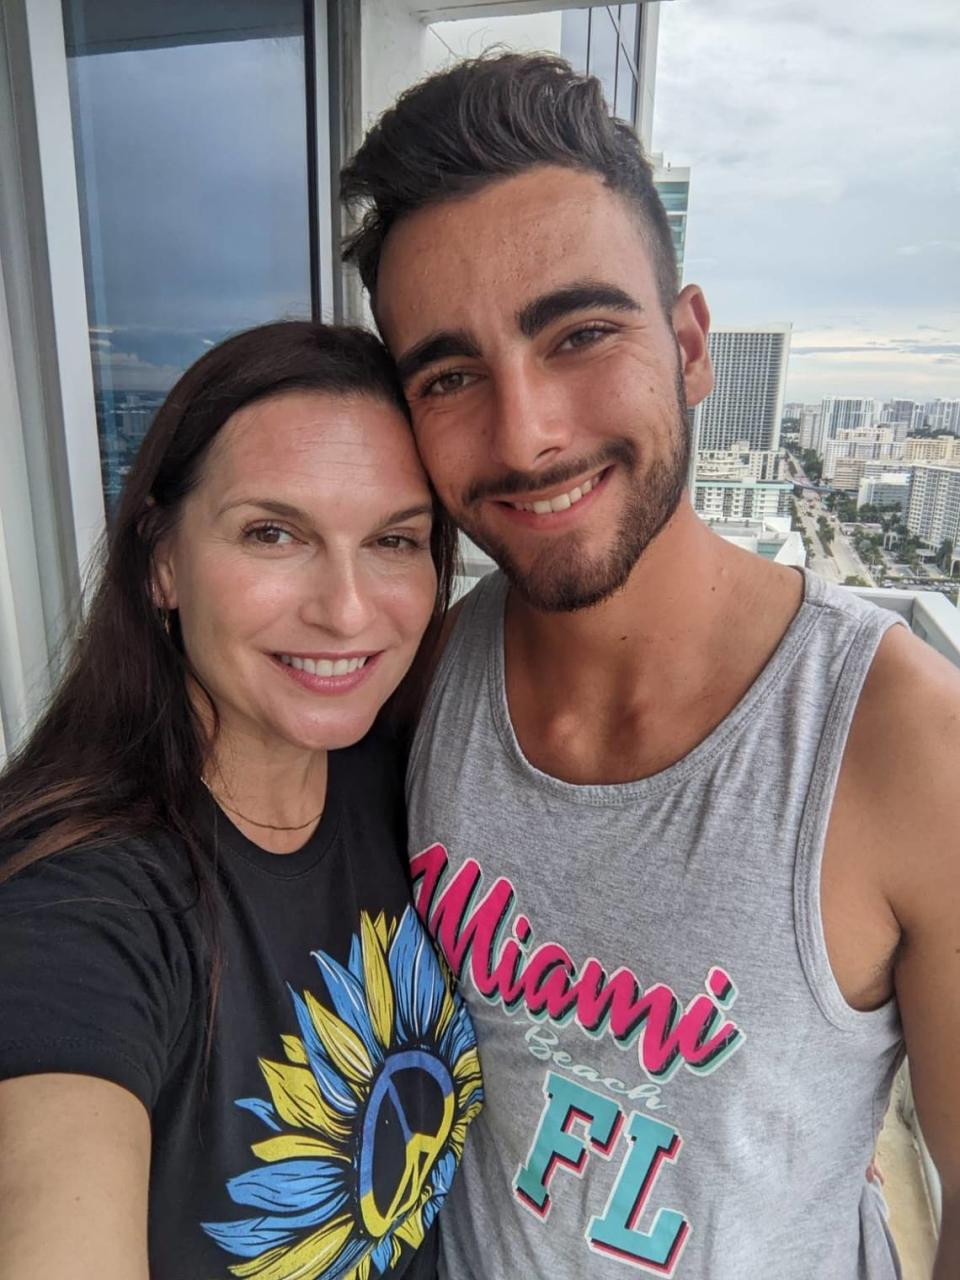 Natalie and her son, David, who re-enlisted in the Israel Defense Forces after hearing the news of the Hamas attacks on Israel. He grew up in Aventura and his mother lives in Hollywood.